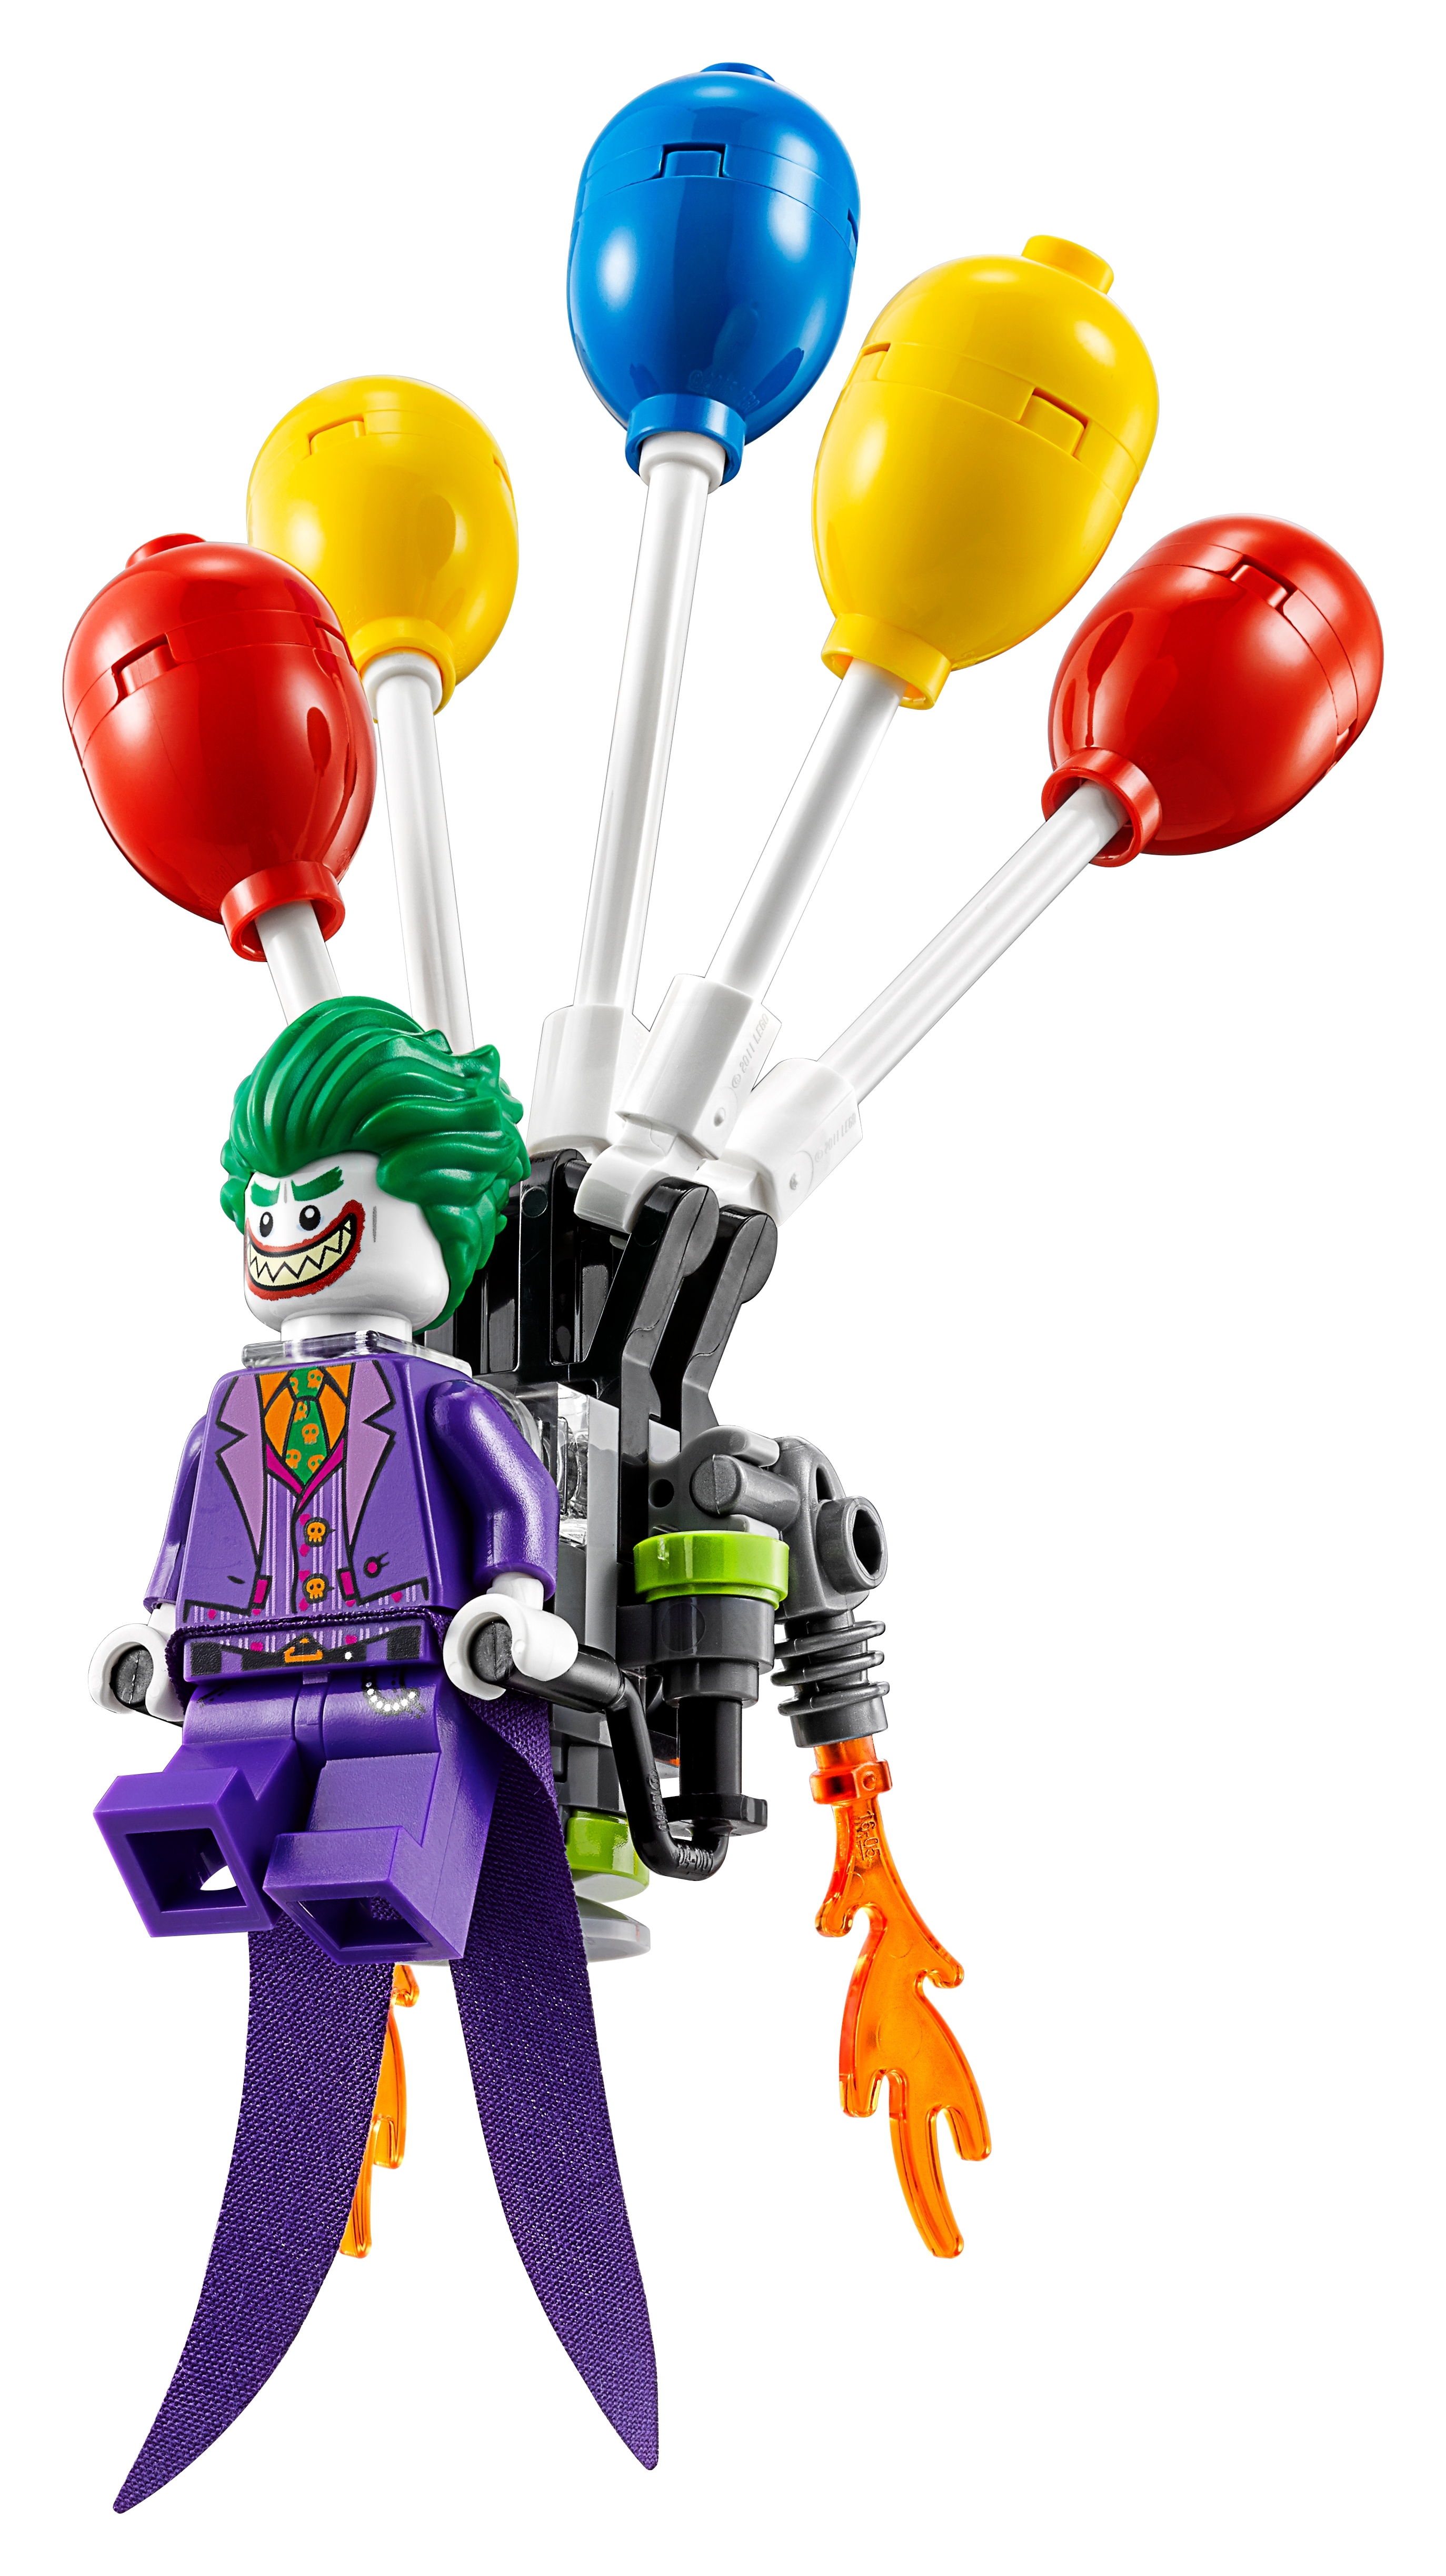 Lego's new Batman set includes more than 3,000 pieces and a questionable  one-off Joker - Polygon